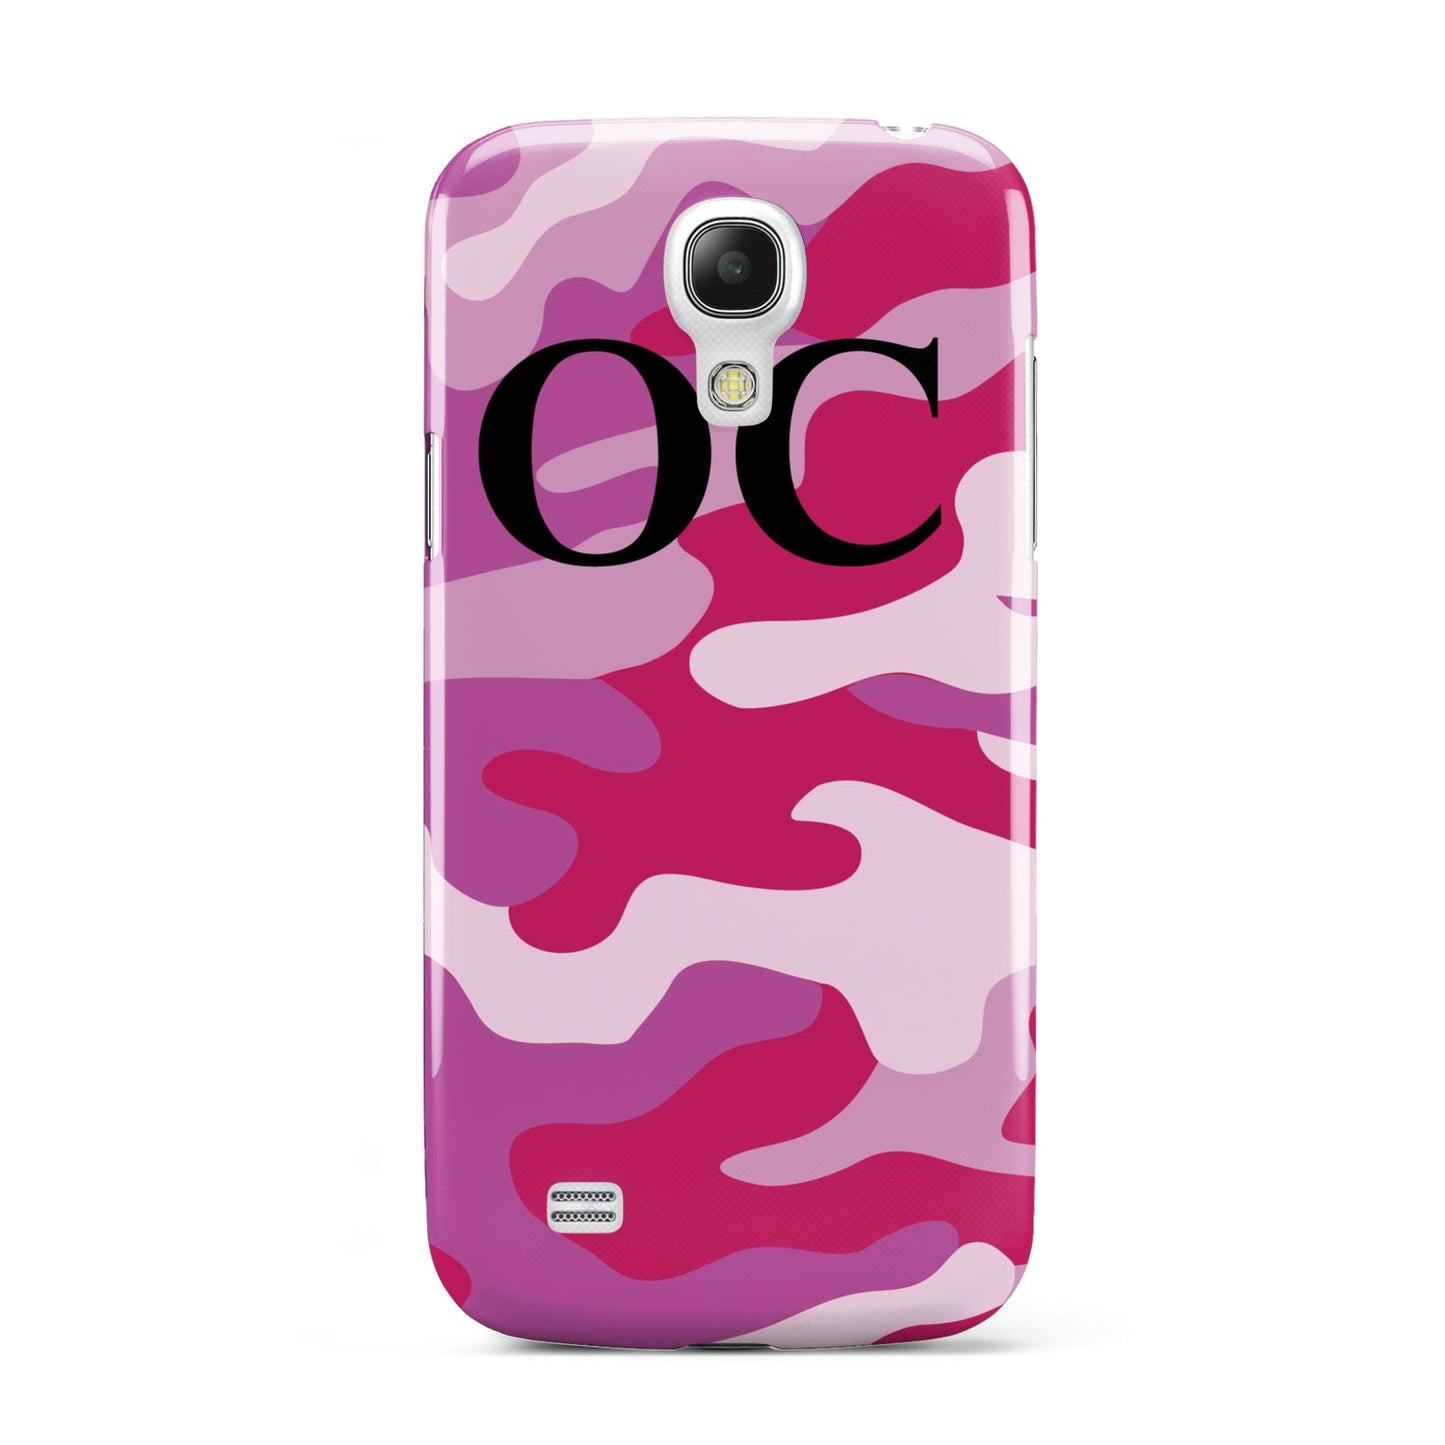 Camouflage Personalised Samsung Galaxy S4 Mini Case